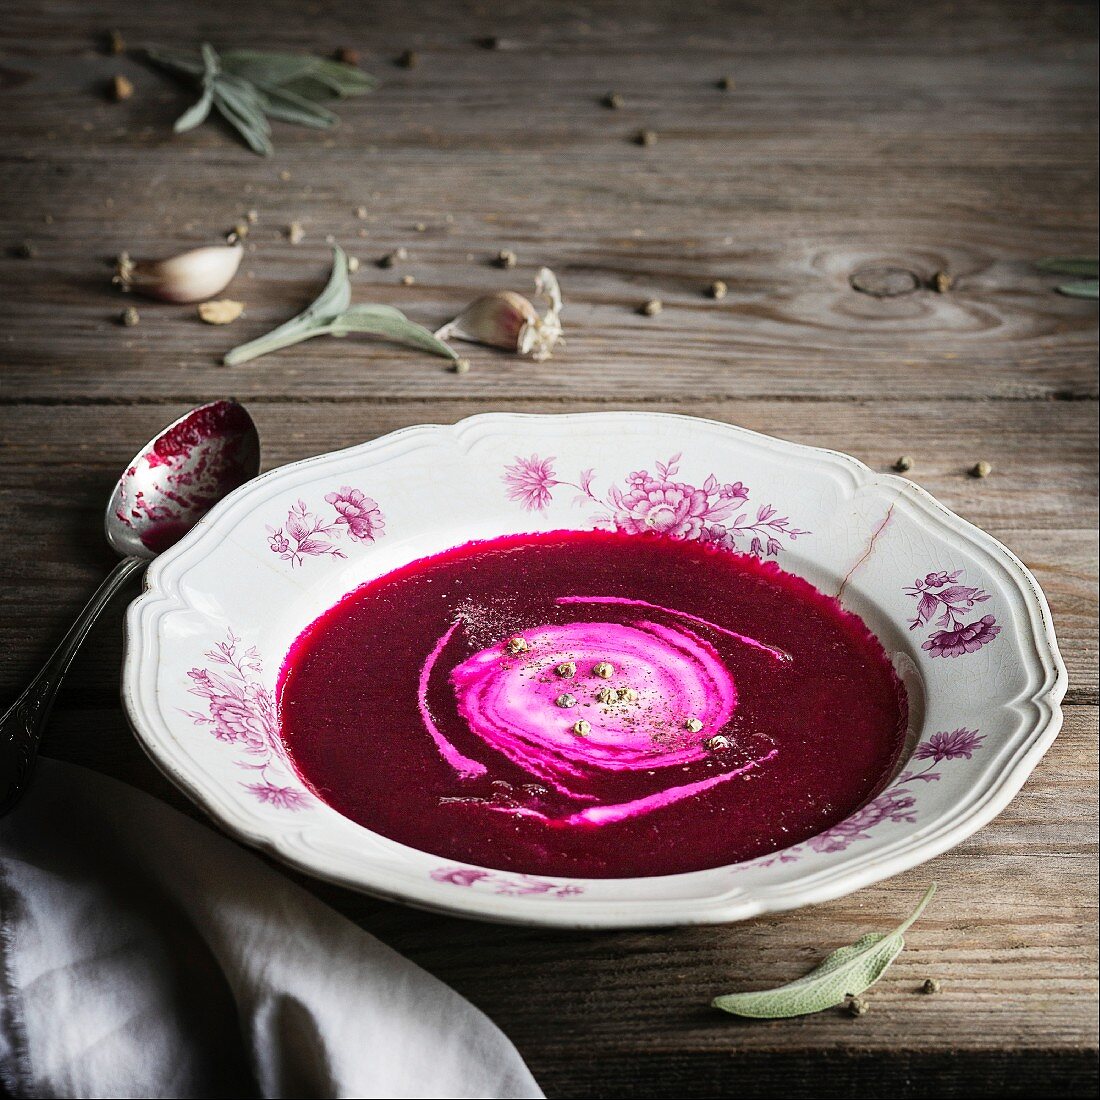 Beetroot cream soup on rustic table